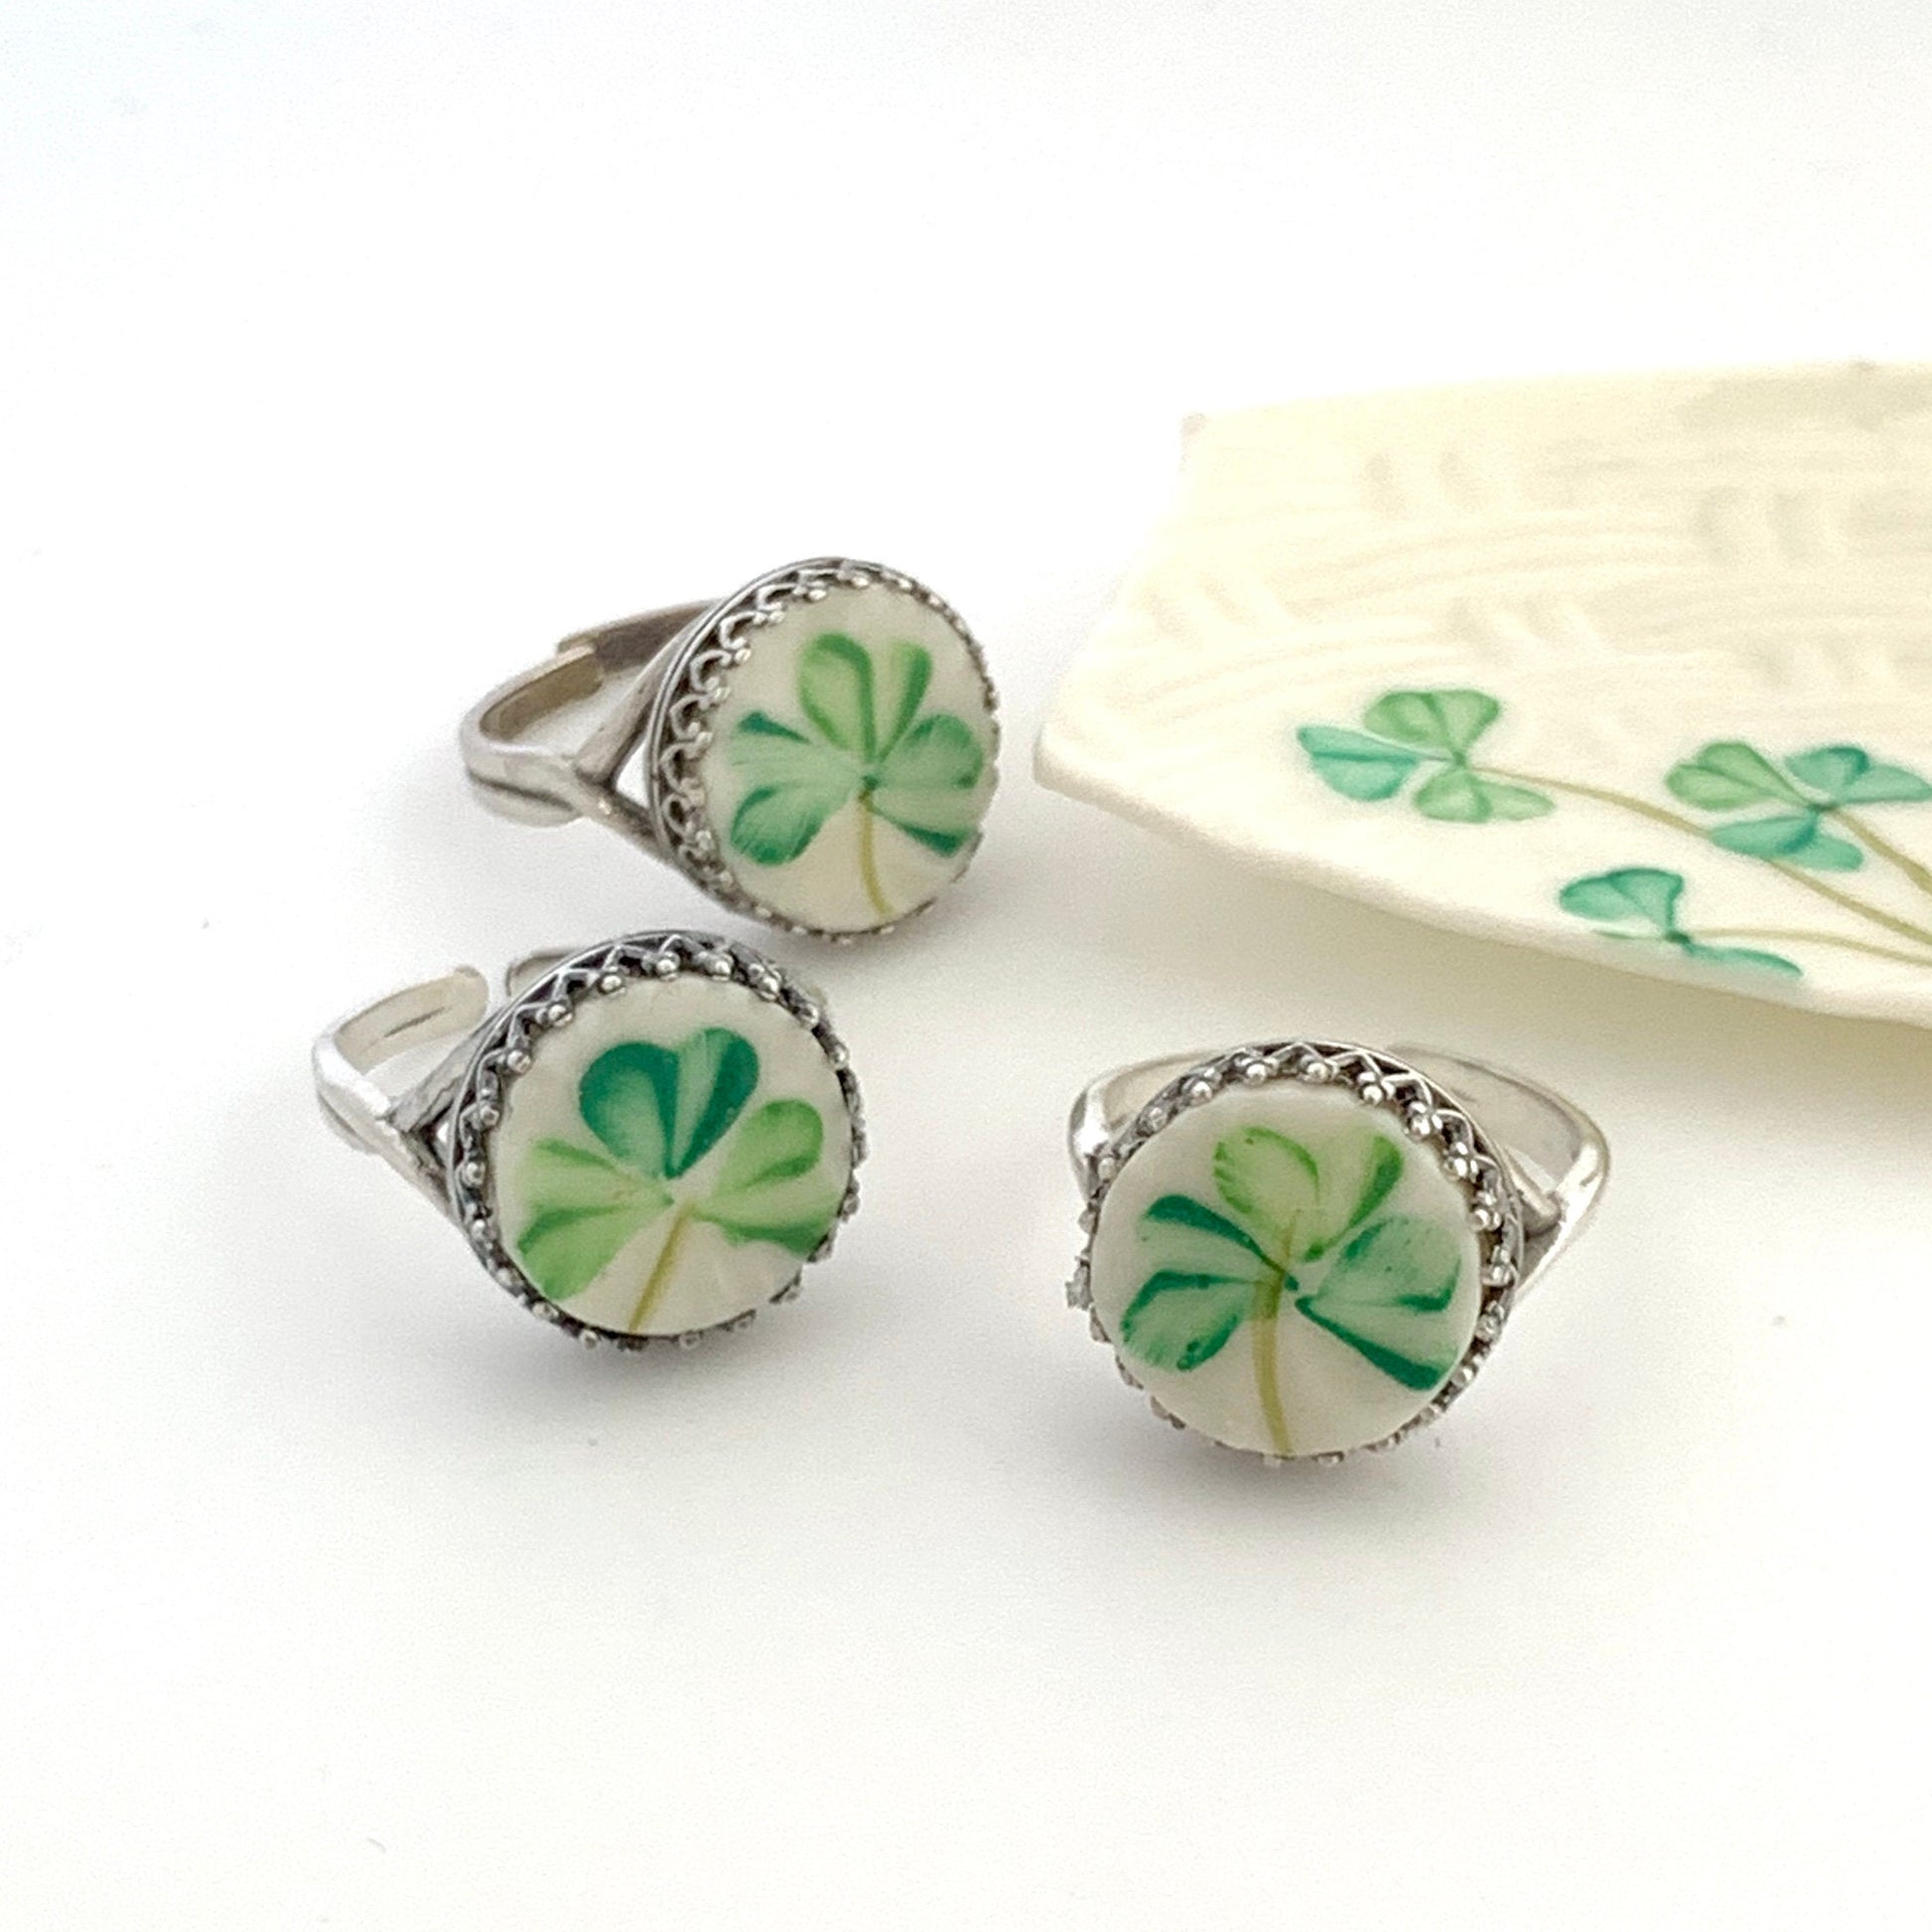 Sterling Silver Irish Ring, Belleek Broken China Jewelry, Celtic Ring, Adjustable Ring, Unique Gifts for Women